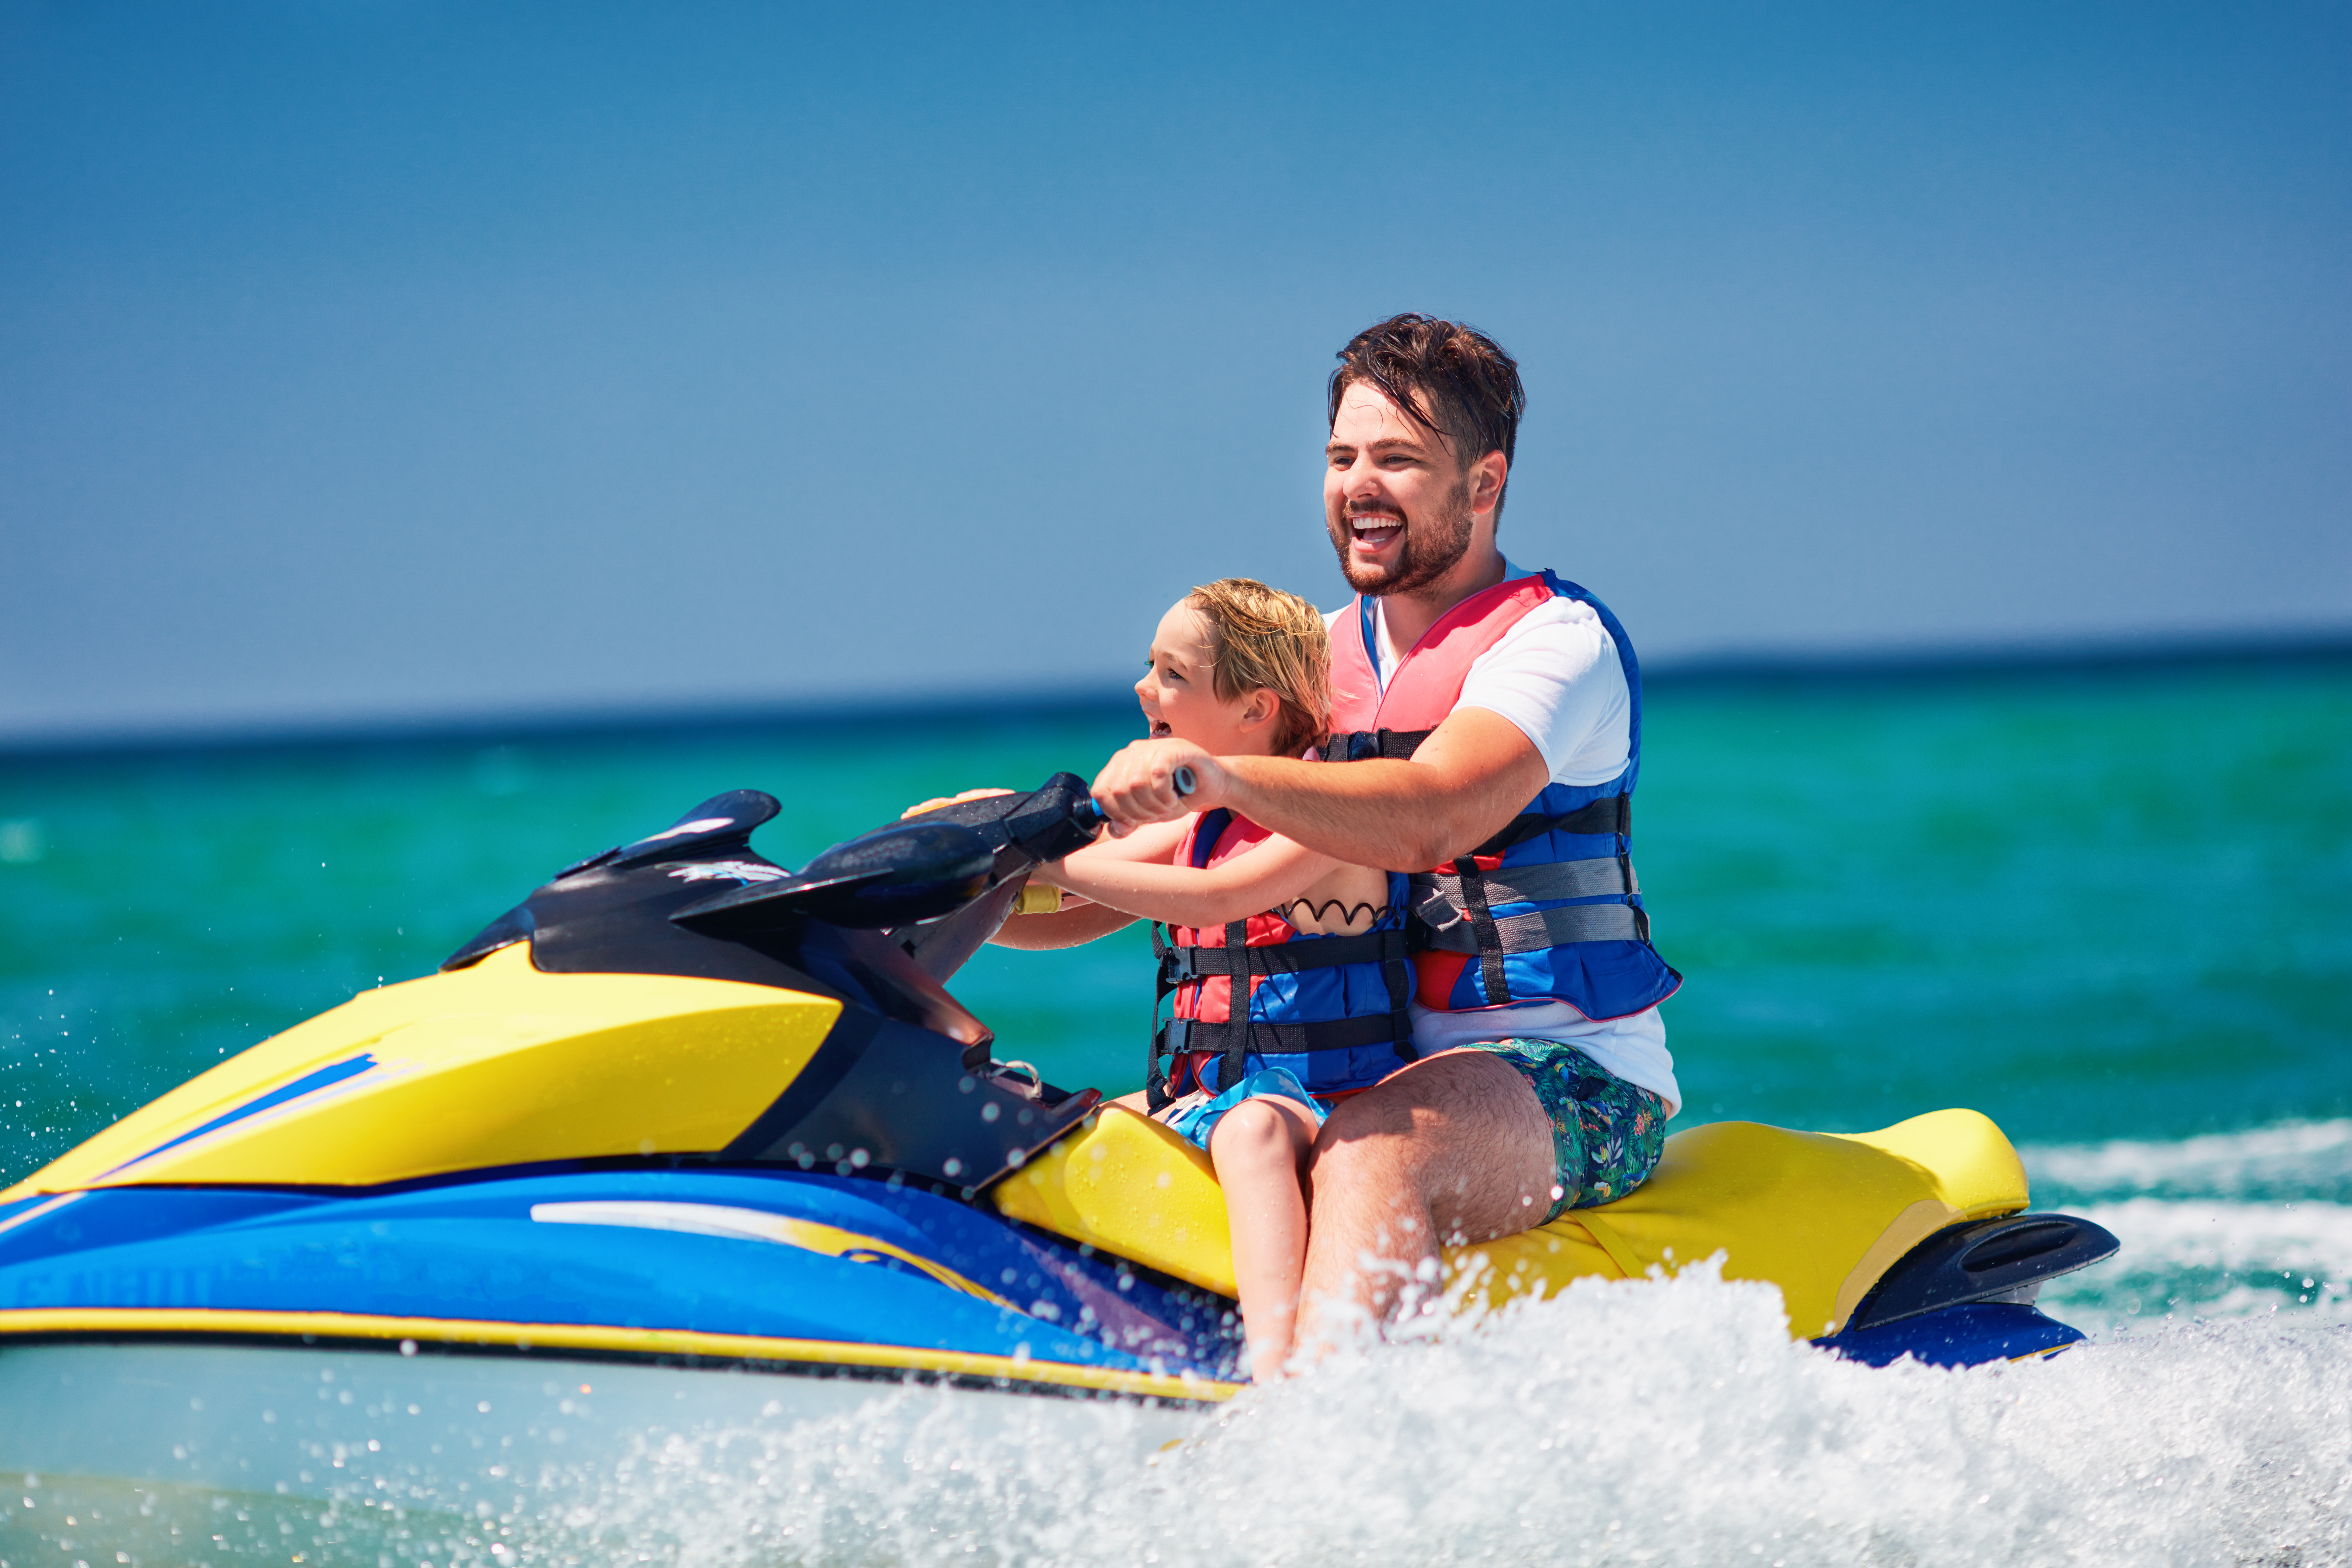 A man and child on a jet ski, boating tips for Labor Day weekend concept. 